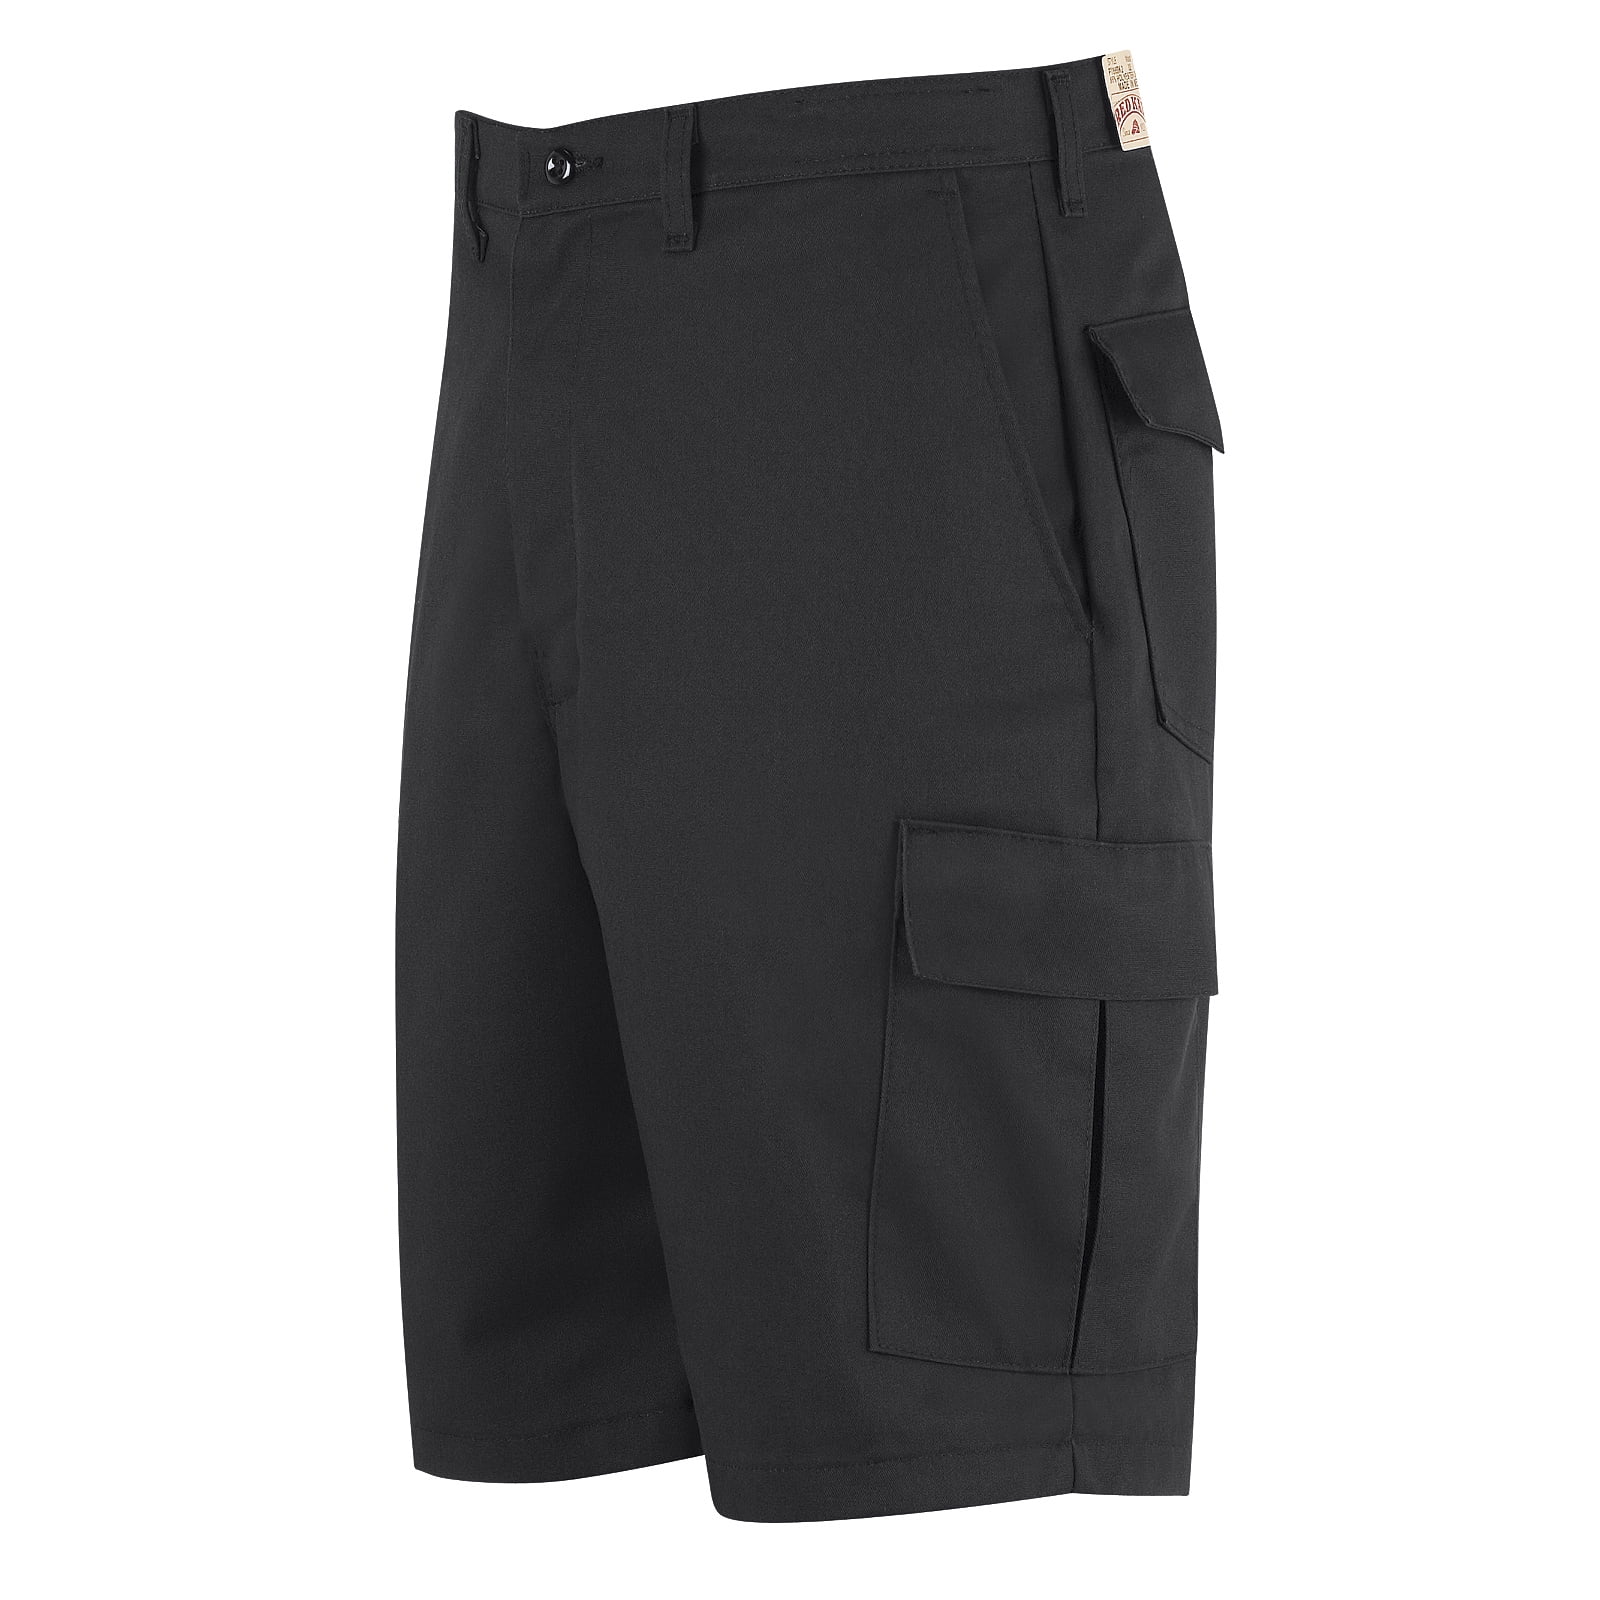 Warrior Mens Polycotton Cargo Work Shorts Trousers Black or Navy Blue 28" to 52" 